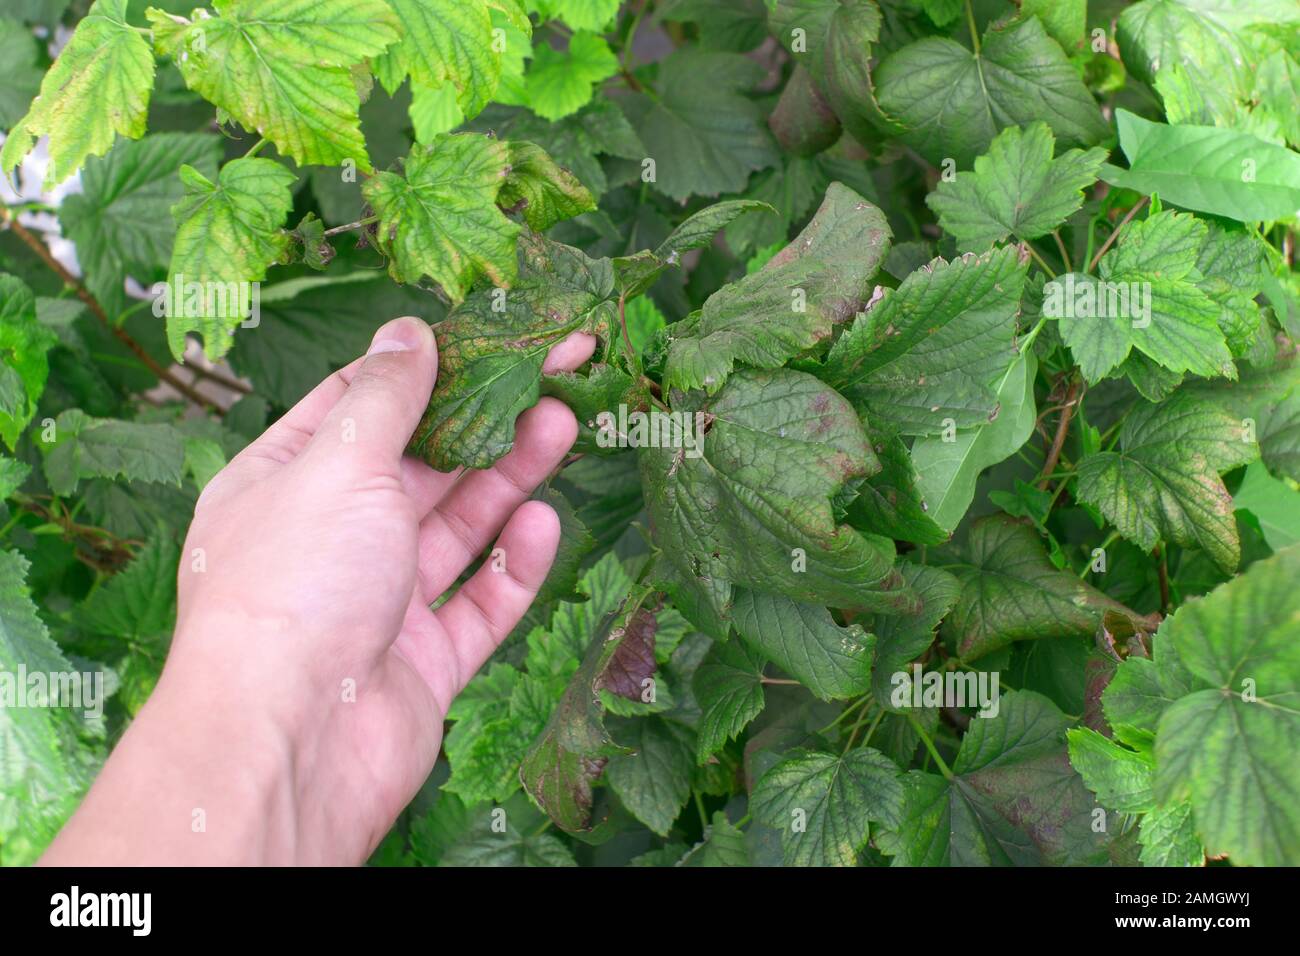 diseases of the leaves of plants such as blackcurrant. a farmer checks a Bush plant to treat leaves against parasites Stock Photo